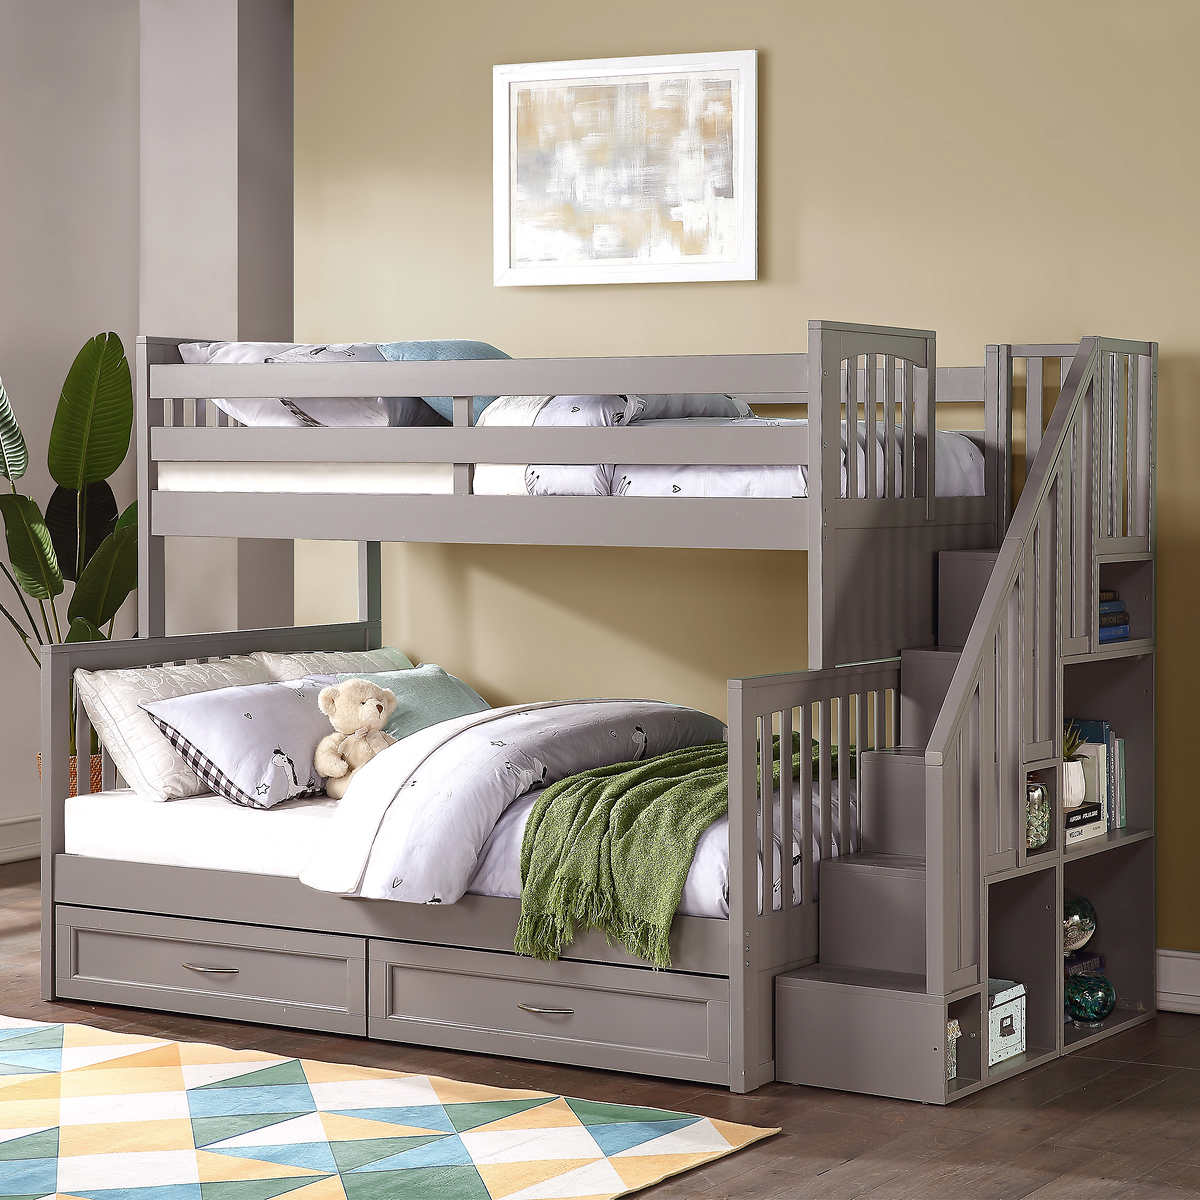 Vandalay Twin Over Double Bunk Bed With, Twin Beds That Convert To Bunk Beds